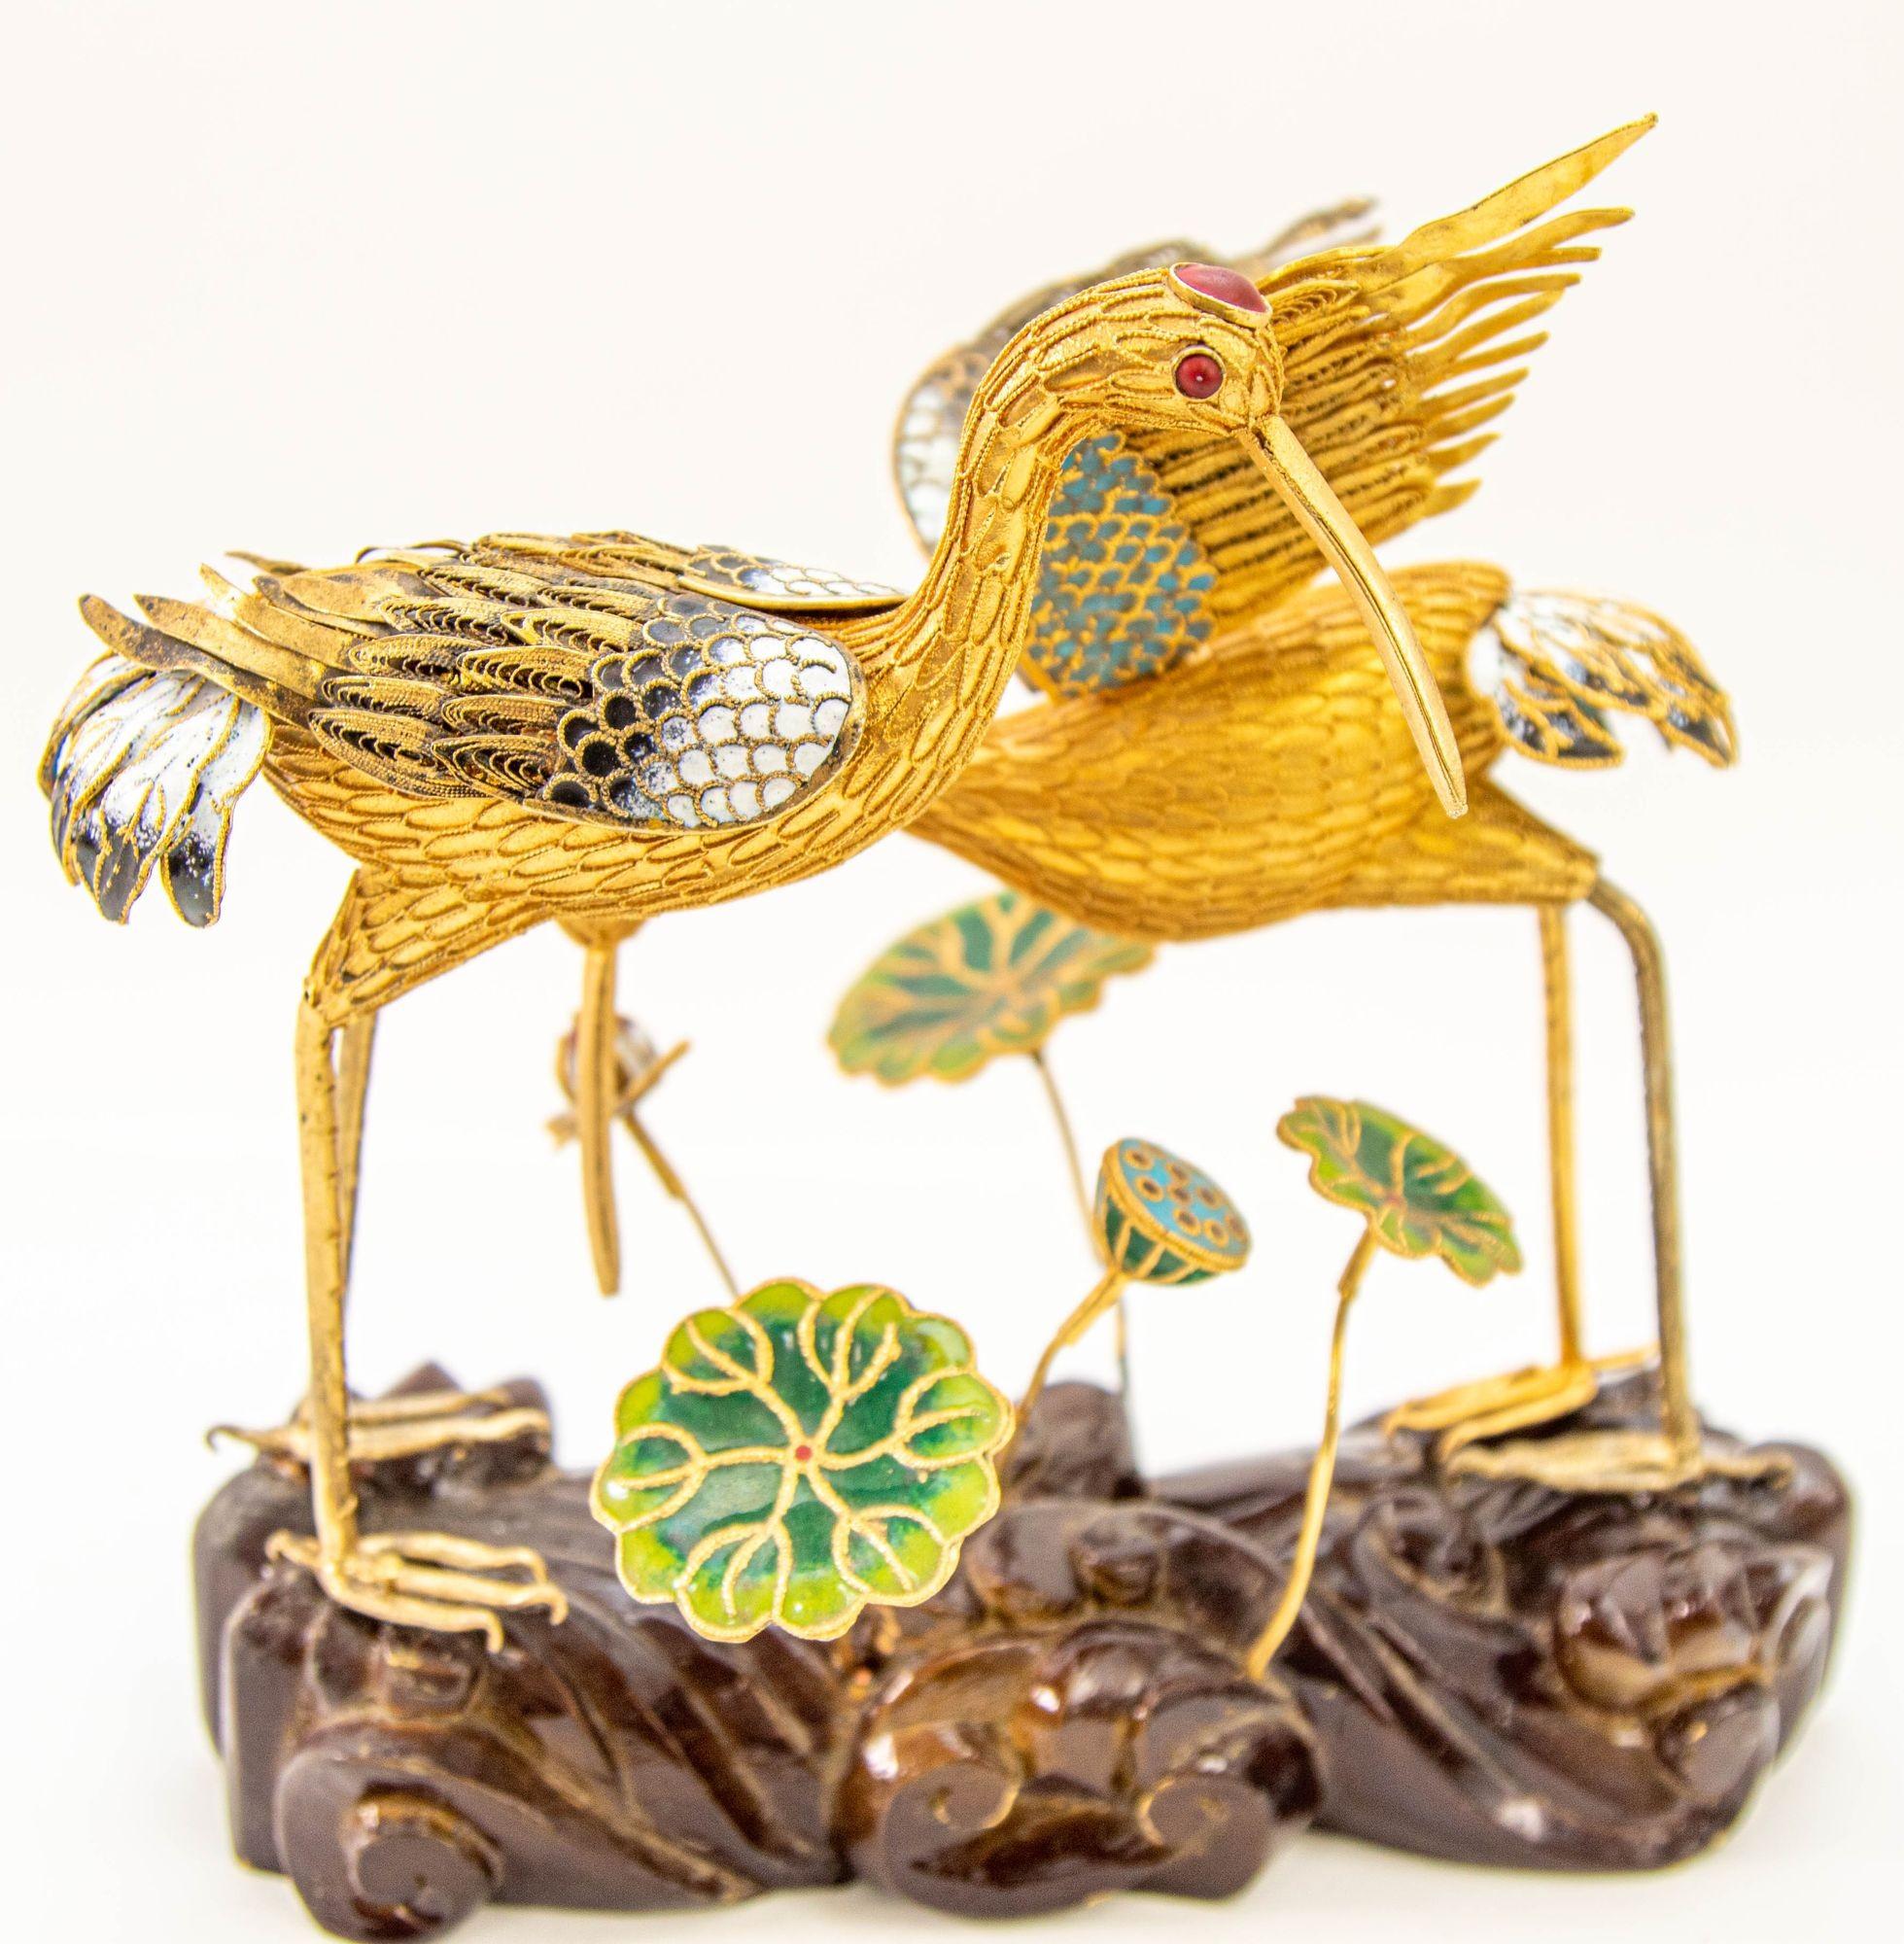 Vintage Chinese Metal Gilt Filigree and Enamel Cranes Figures on Wooden Stand For Sale 4